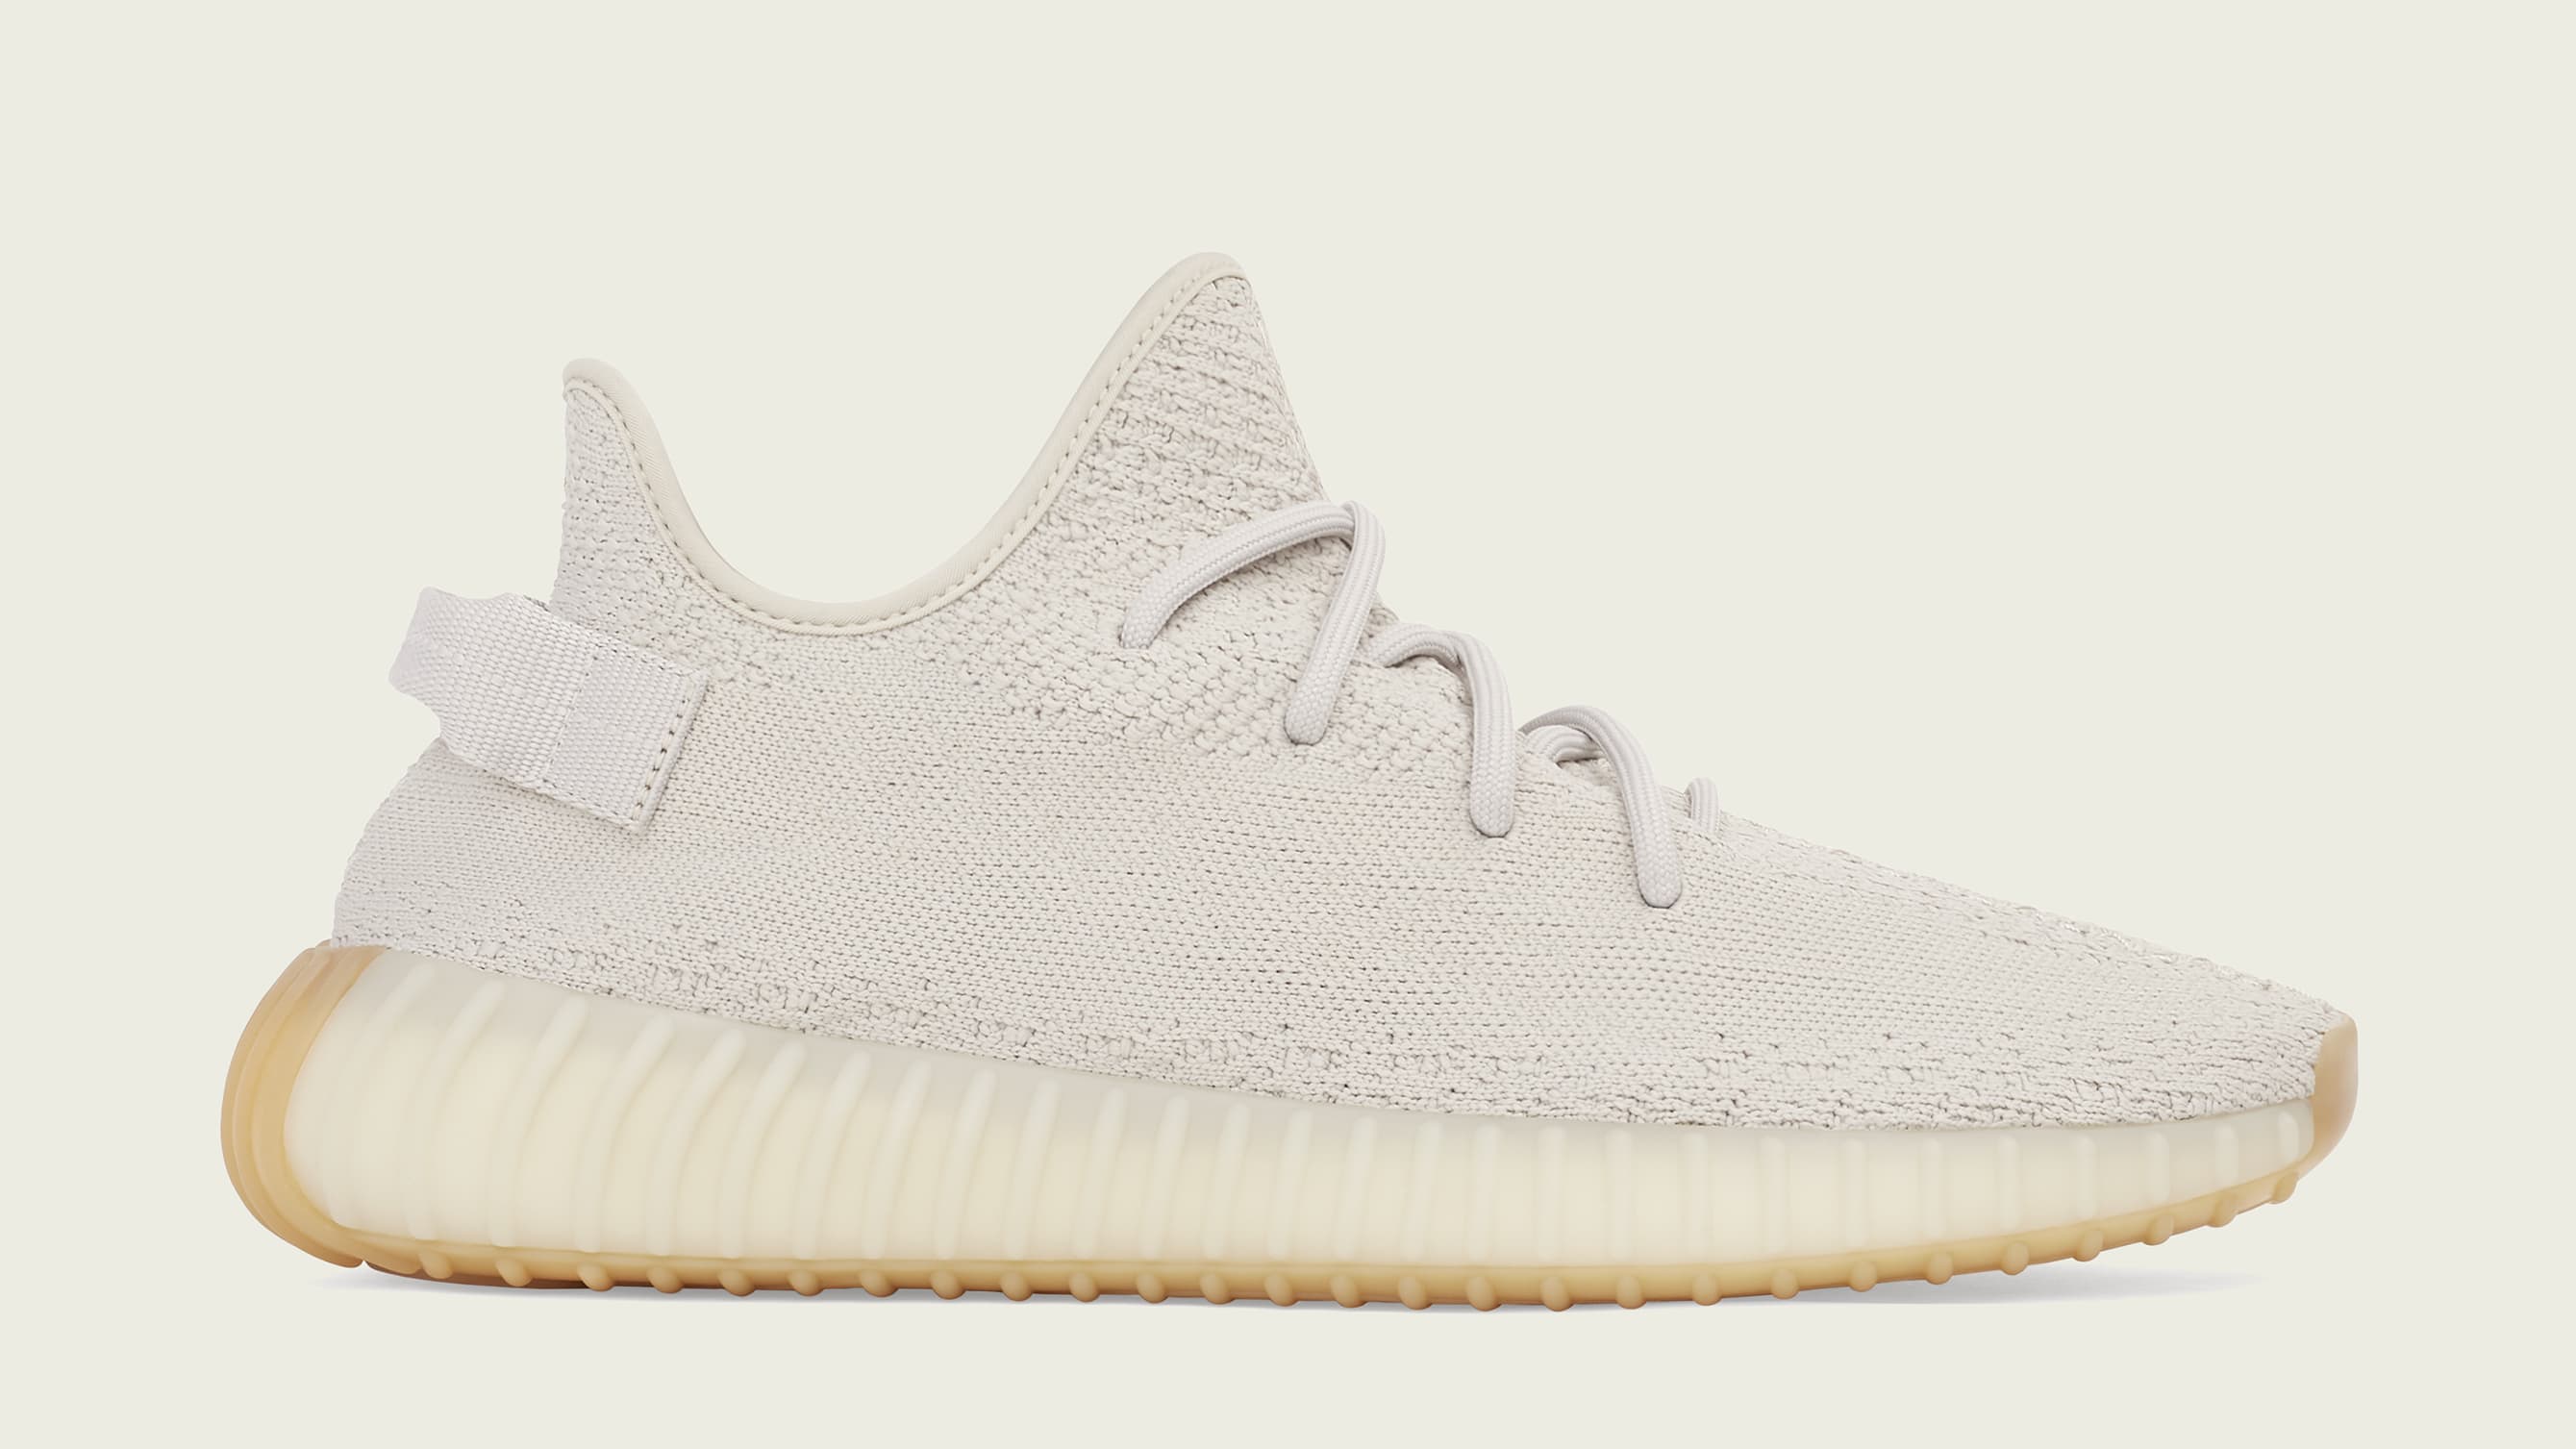 Adidas and Yeezy Are Teasing a Launch 